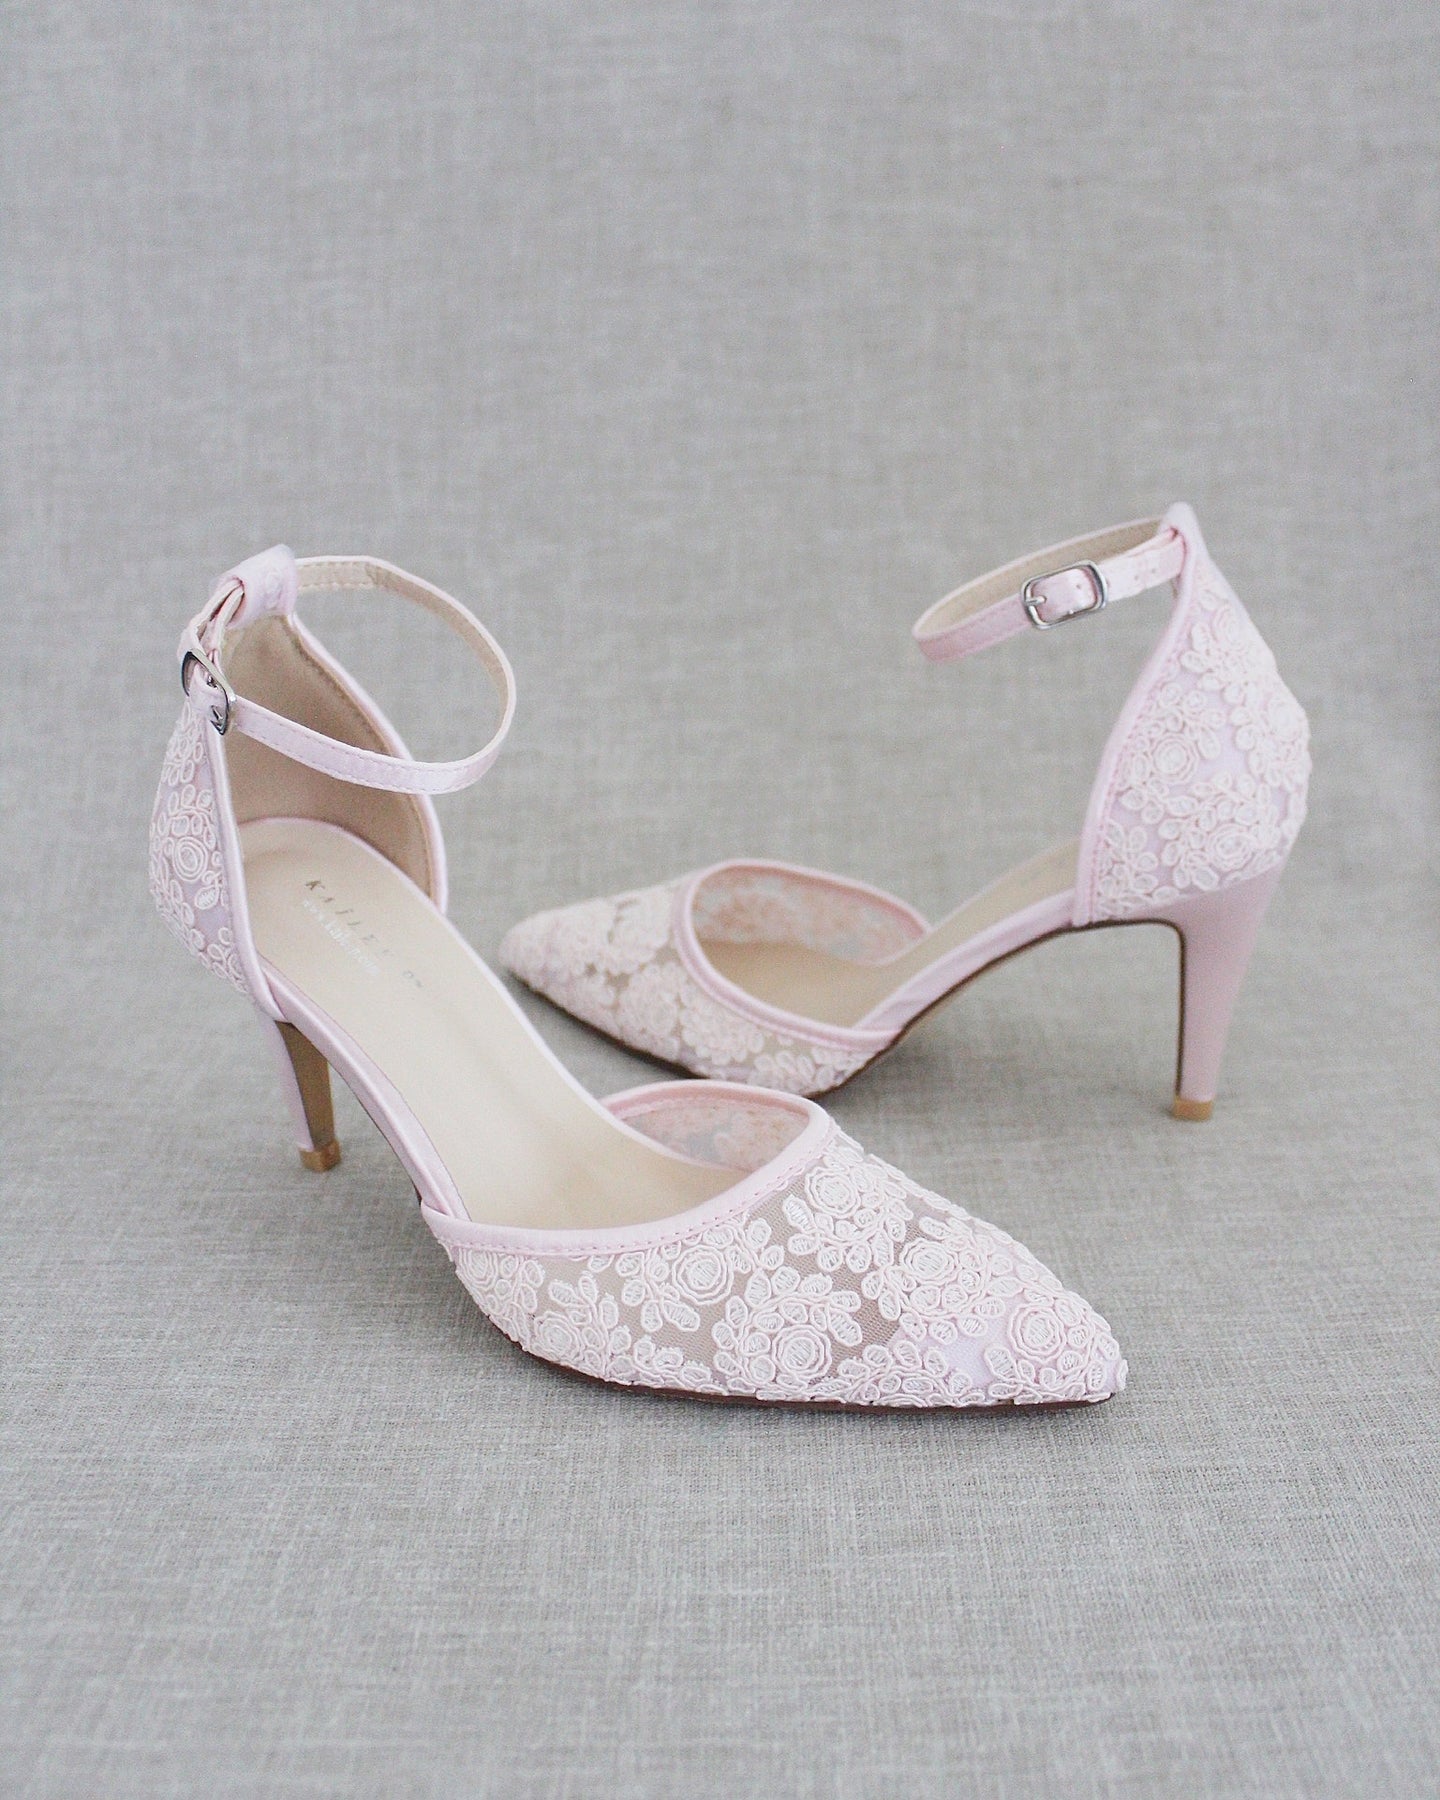 Buy Bridal Wedding Shoes Bridal Shoes-low Heel Shoes Online in India - Etsy